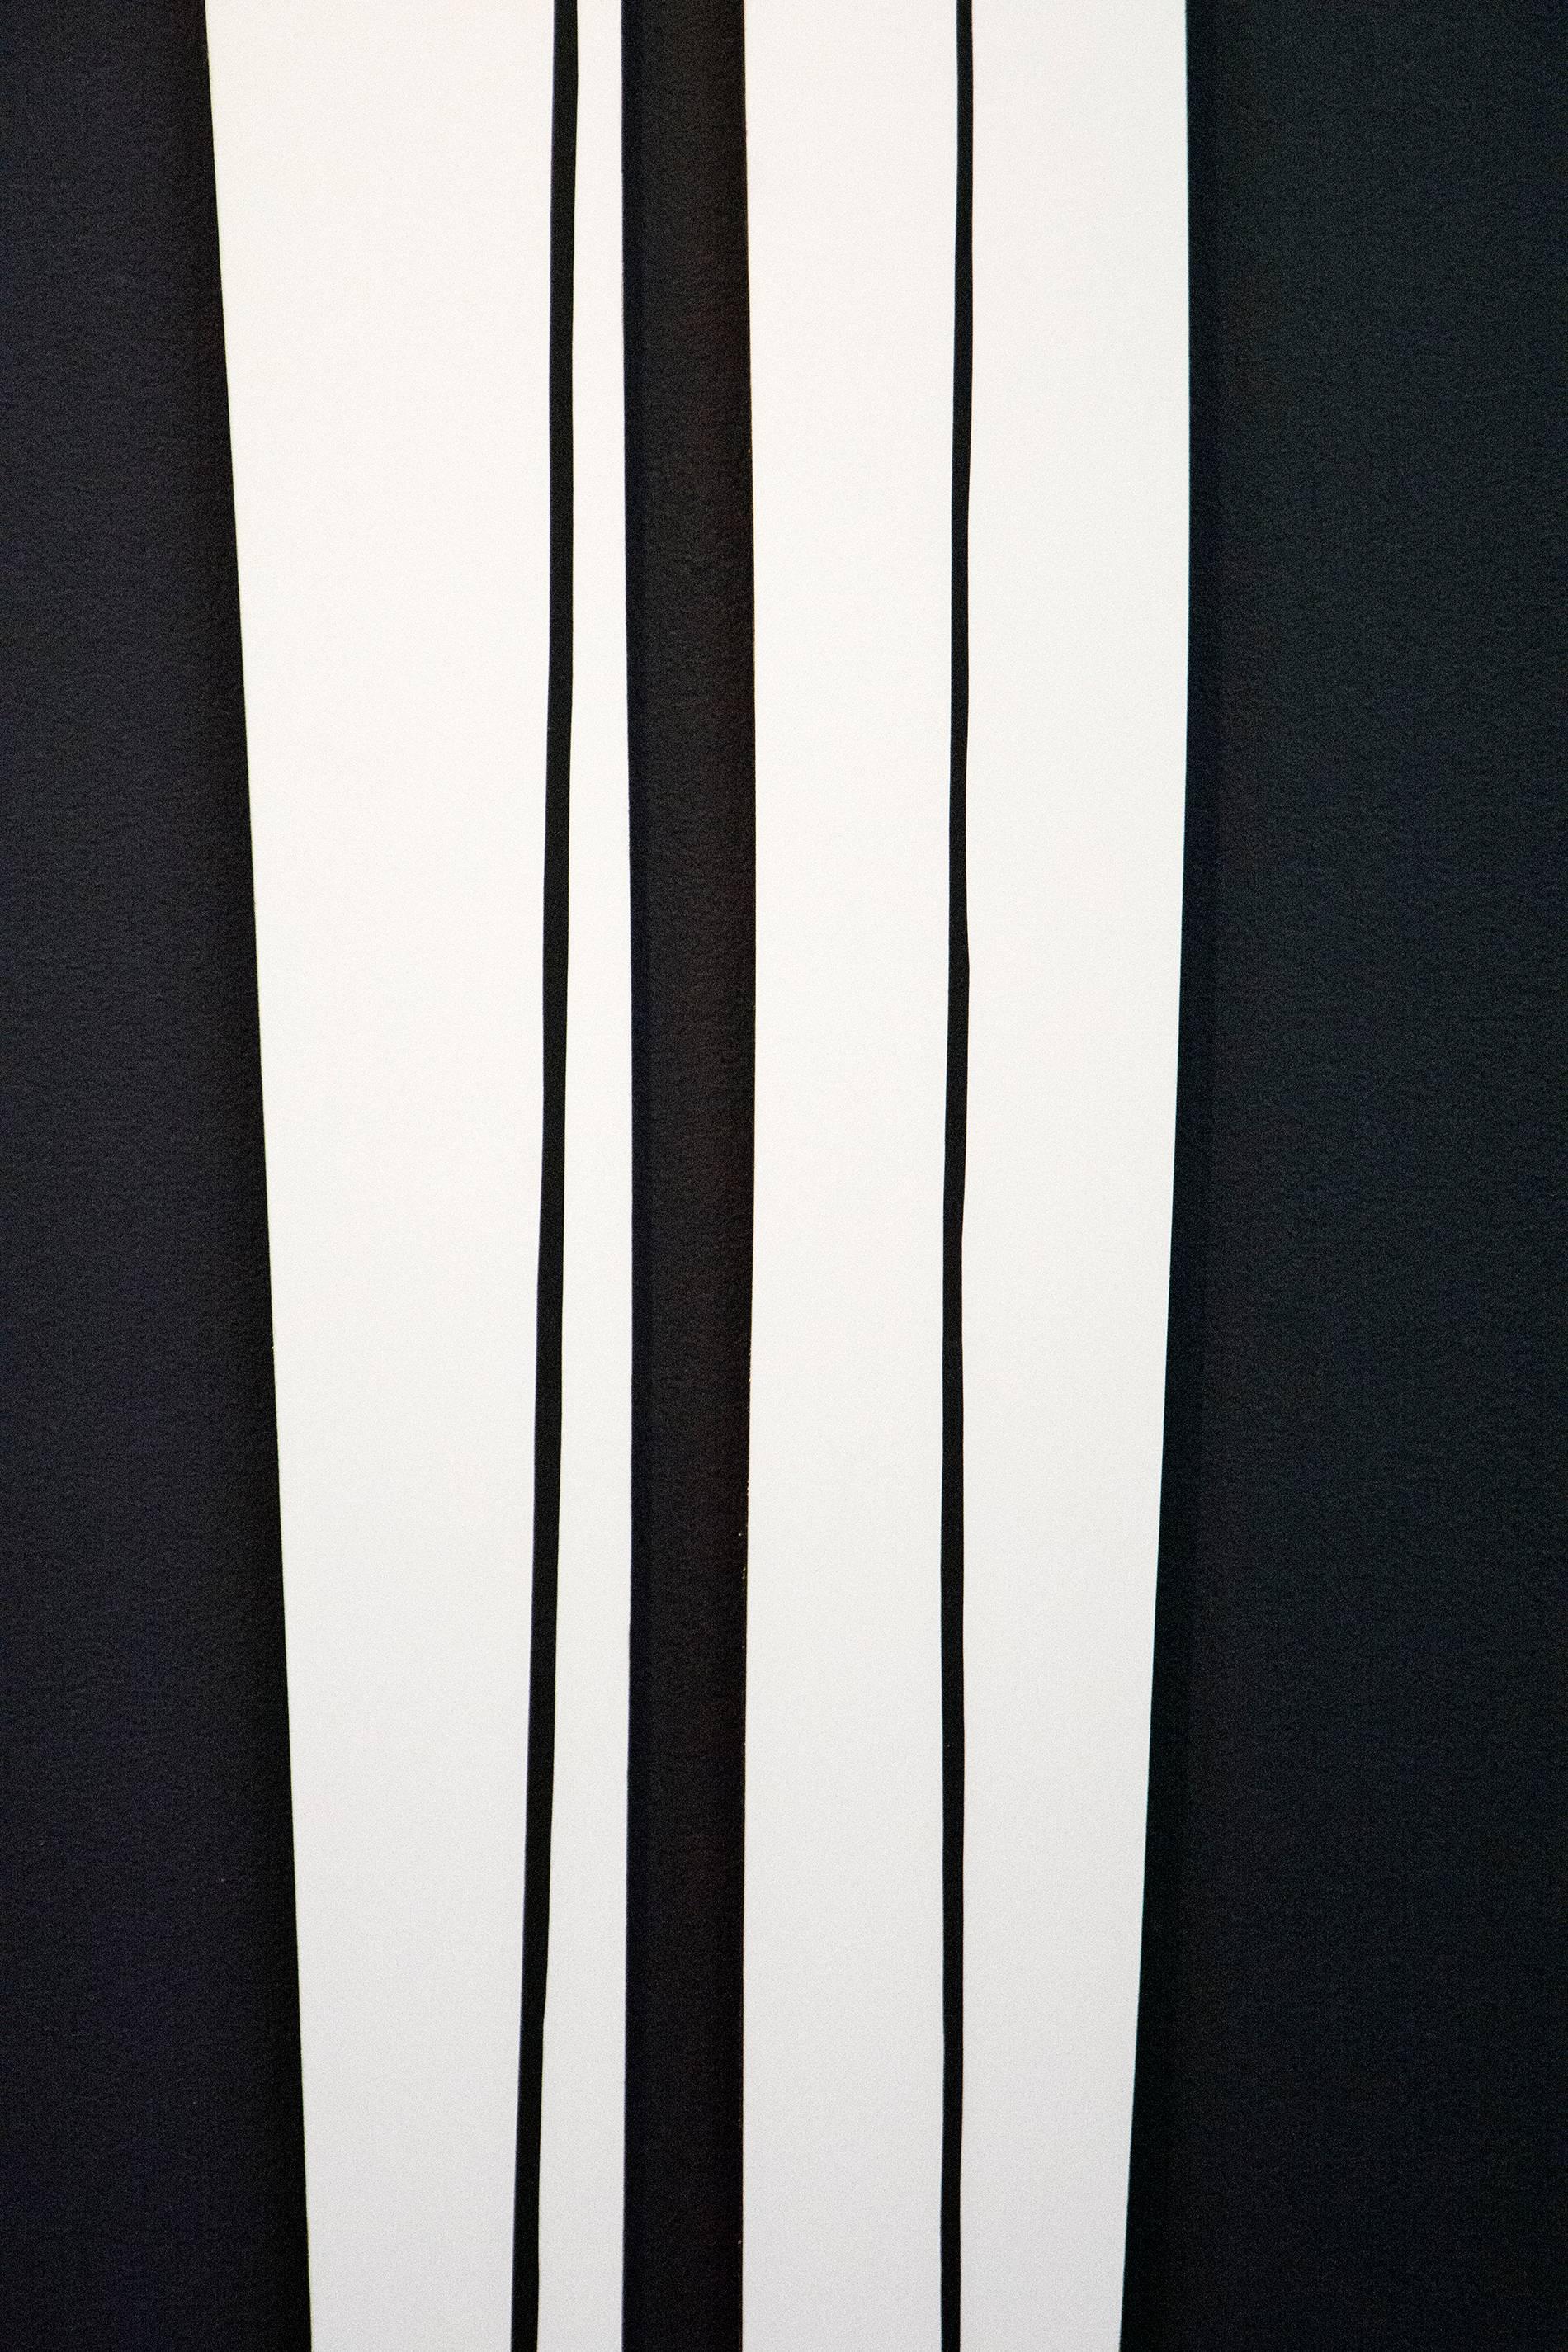 Tall Grass-Like Objects 1 & 2 - fun, gold leaf edge, acrylic on shaped panel - Abstract Painting by Aron Hill